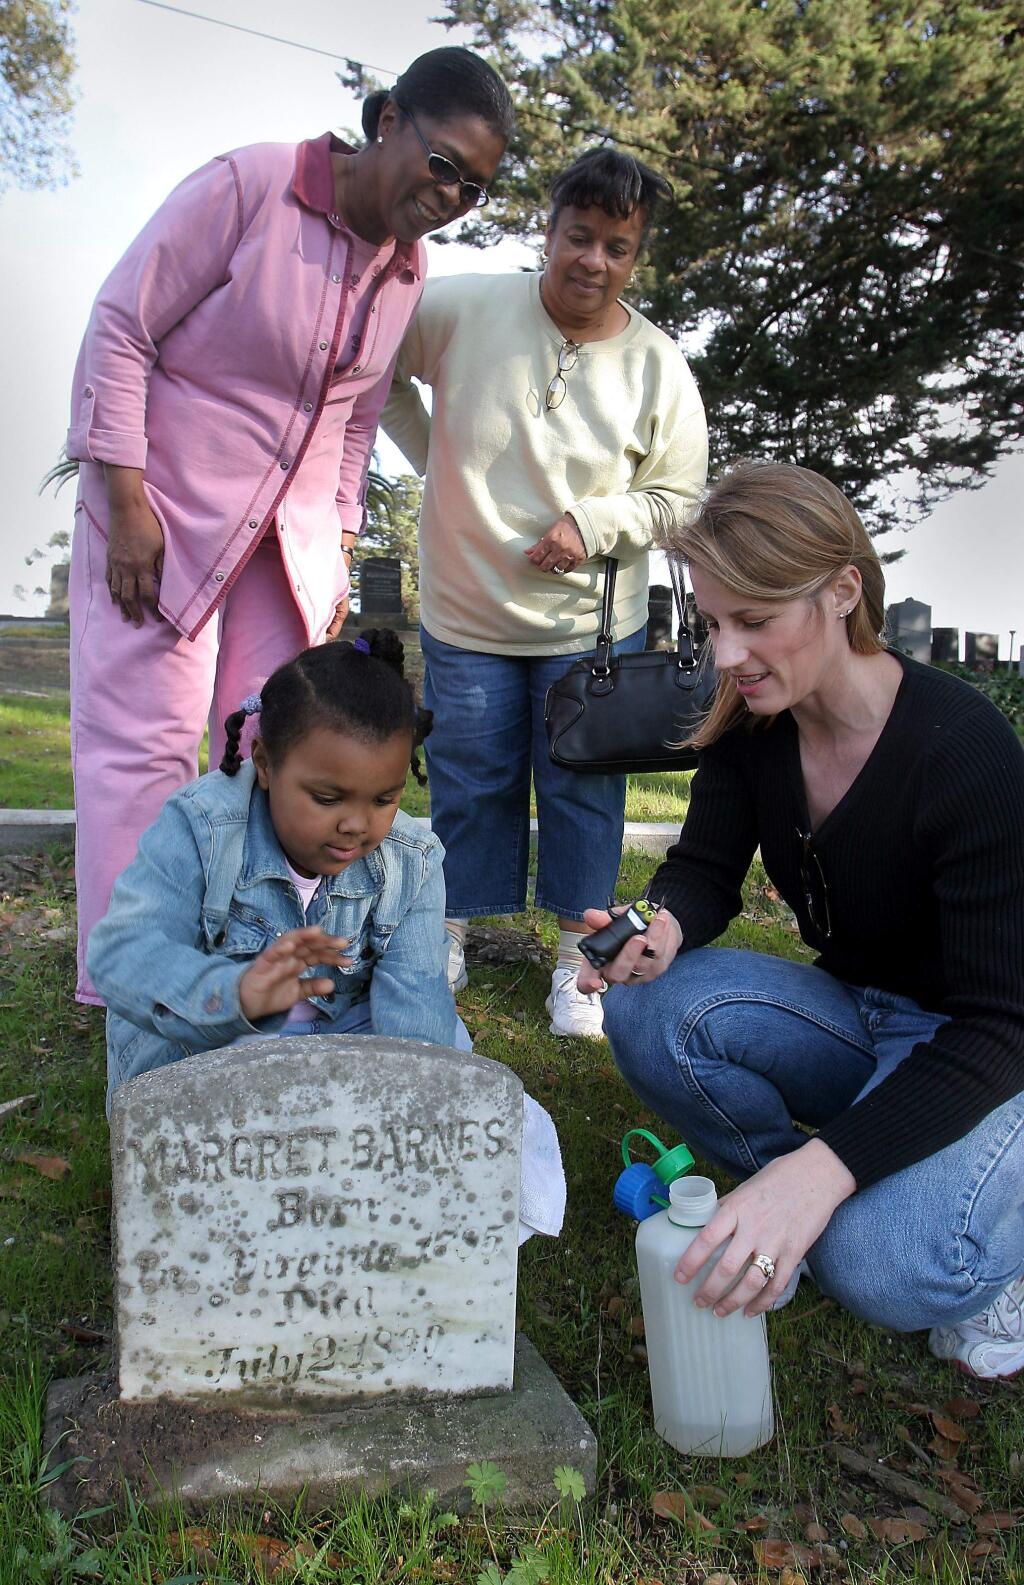 Four-year-old Jade Ross cleans off the tombstone of Petaluma pioneer Margret Barnes at the Cypress Hill Memorial Park. Accompanying Jade is Petaluma historian and Sonoma County librarian Katherine Rinehart (kneeling), Jade's grandmother Faith Ross, in pink, and Joann Gleaves. The women were doing research for an exhibit on black pioneers they curated for the Petaluma Museum. (Jeff Kan Lee/ The Press Democrat, 2007)